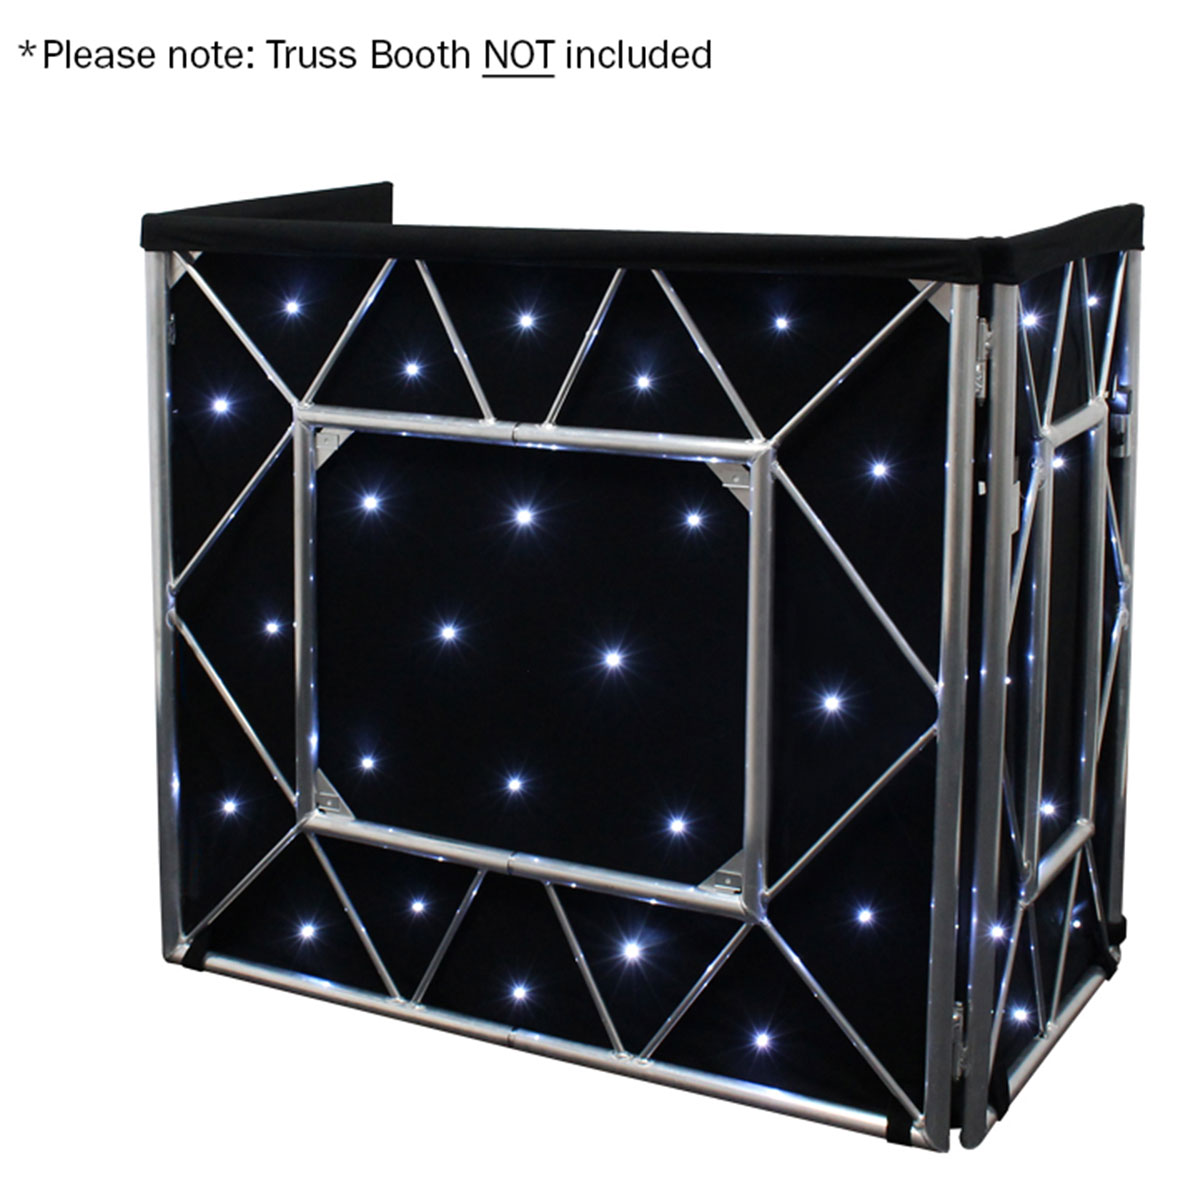 Equinox Truss Booth LED Starcloth System